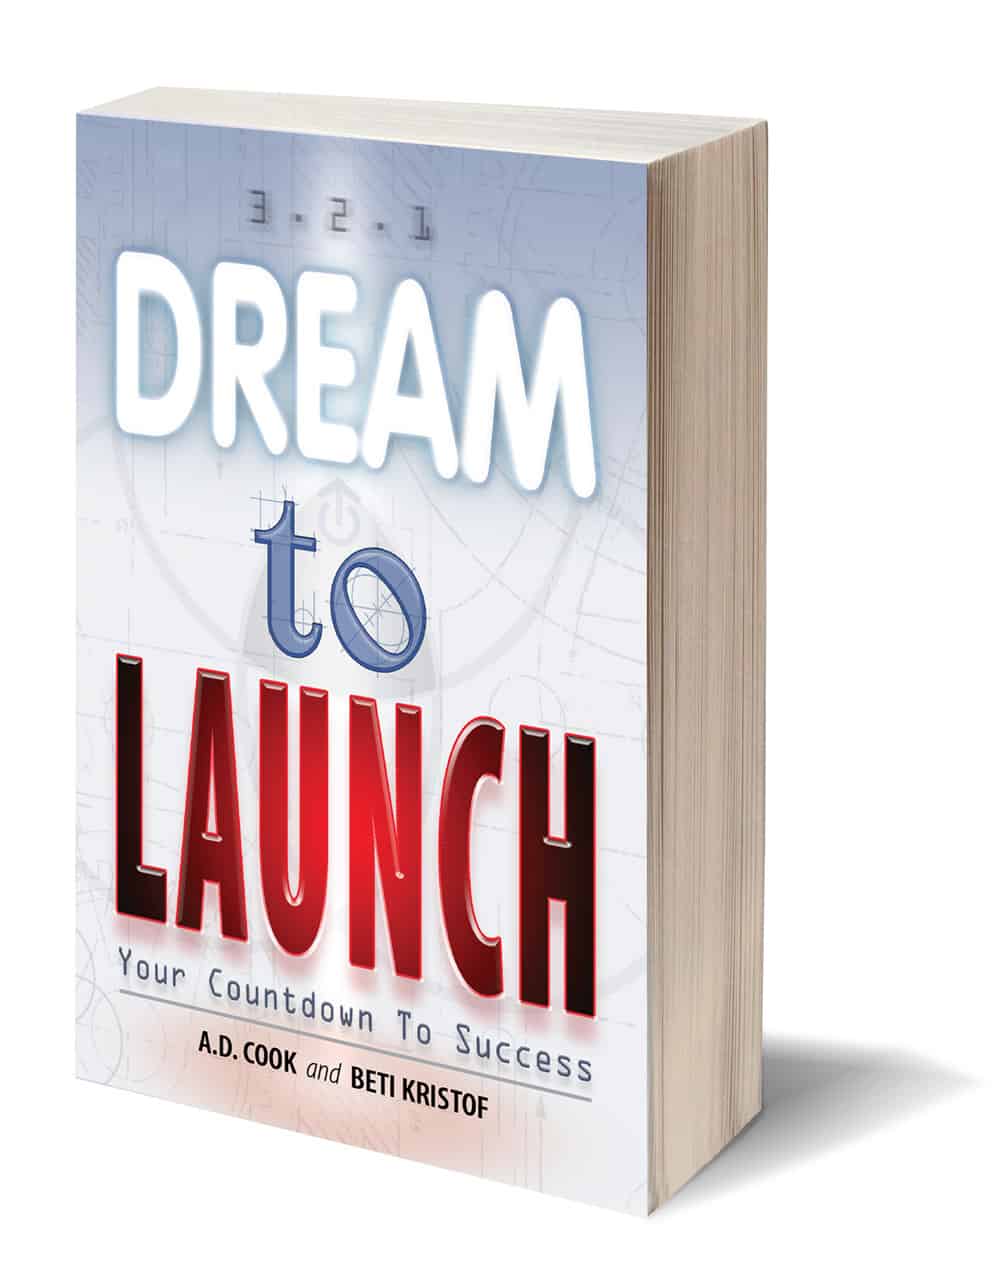 Dream To Launch by A.D. Cook and Beti Kristof